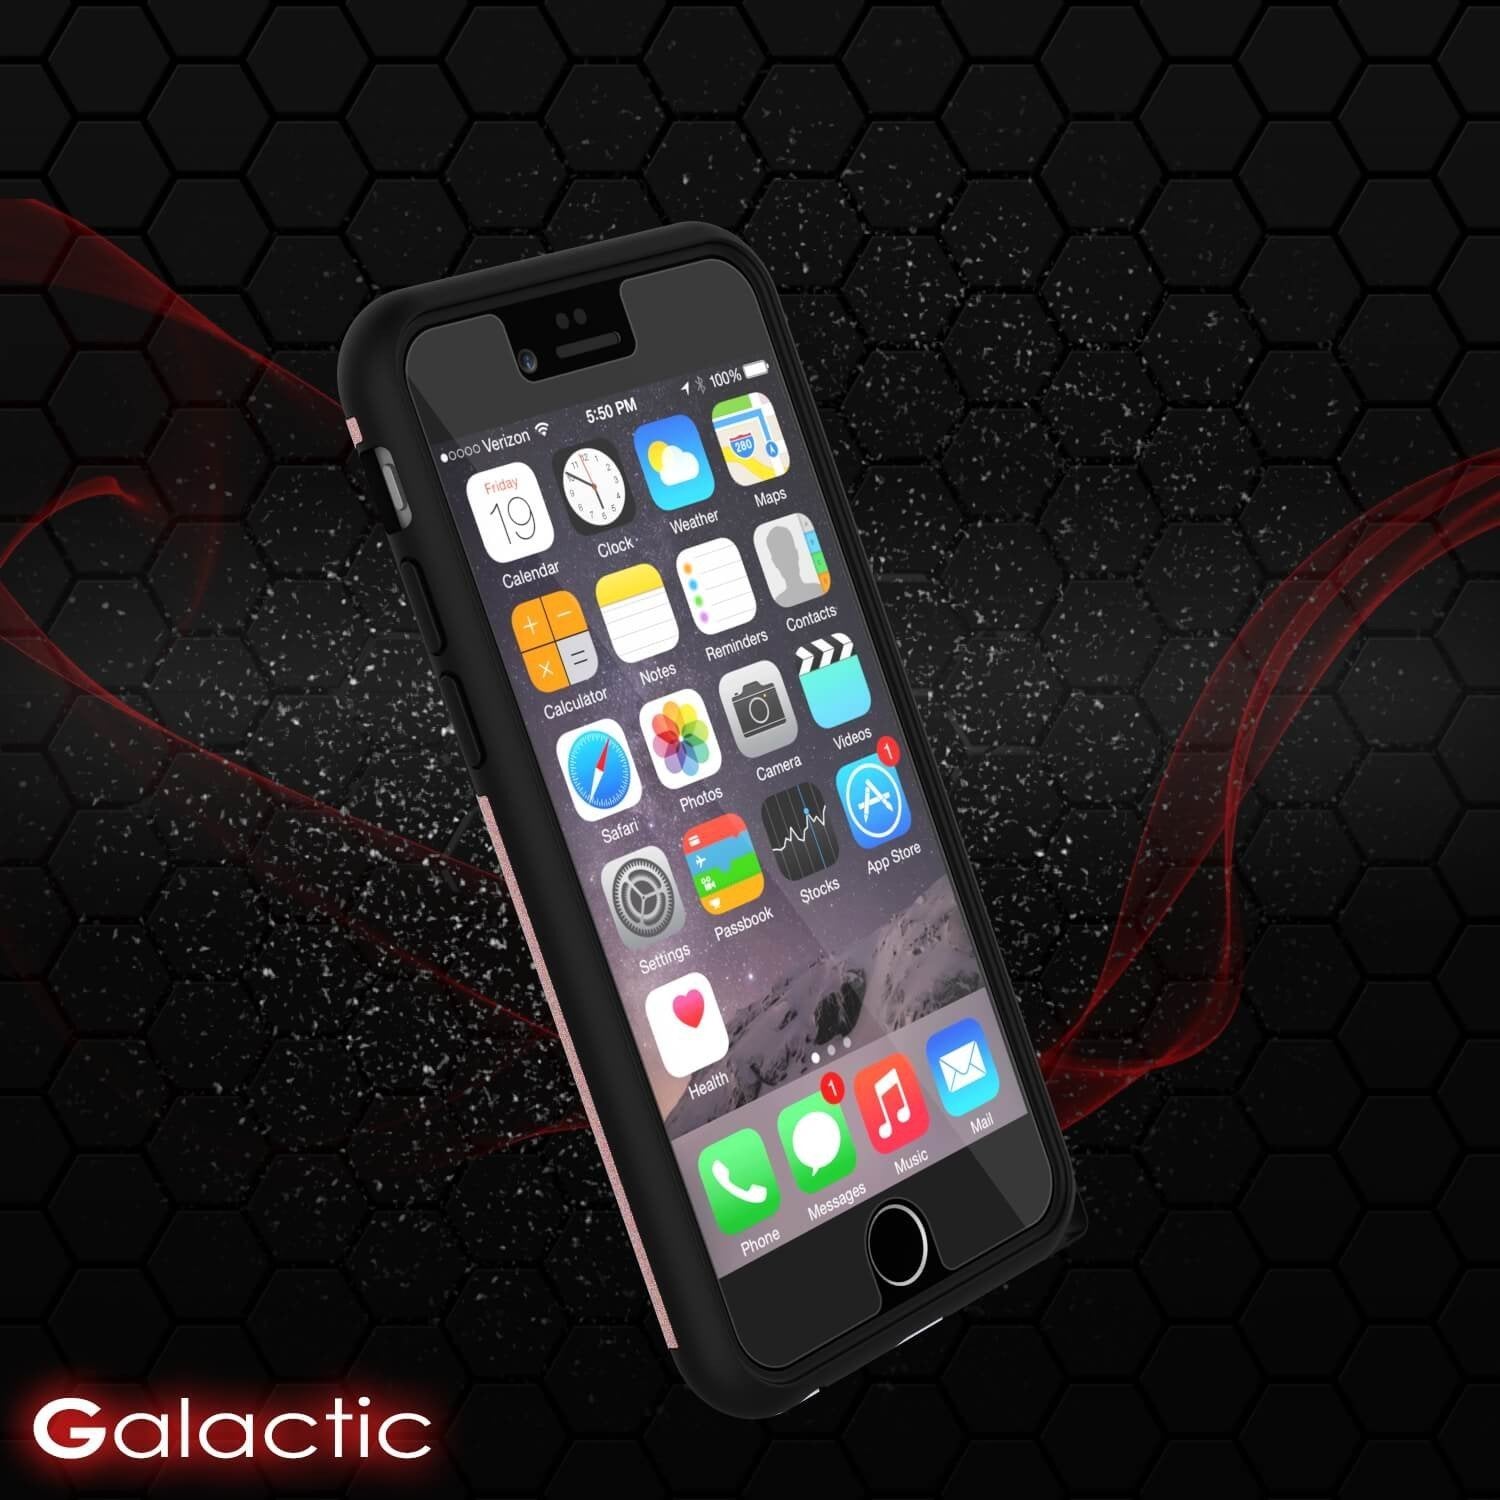 iPhone 5s/5 Case PunkCase Galactic silver Series Slim w/ Tempered Glass | Lifetime Warranty